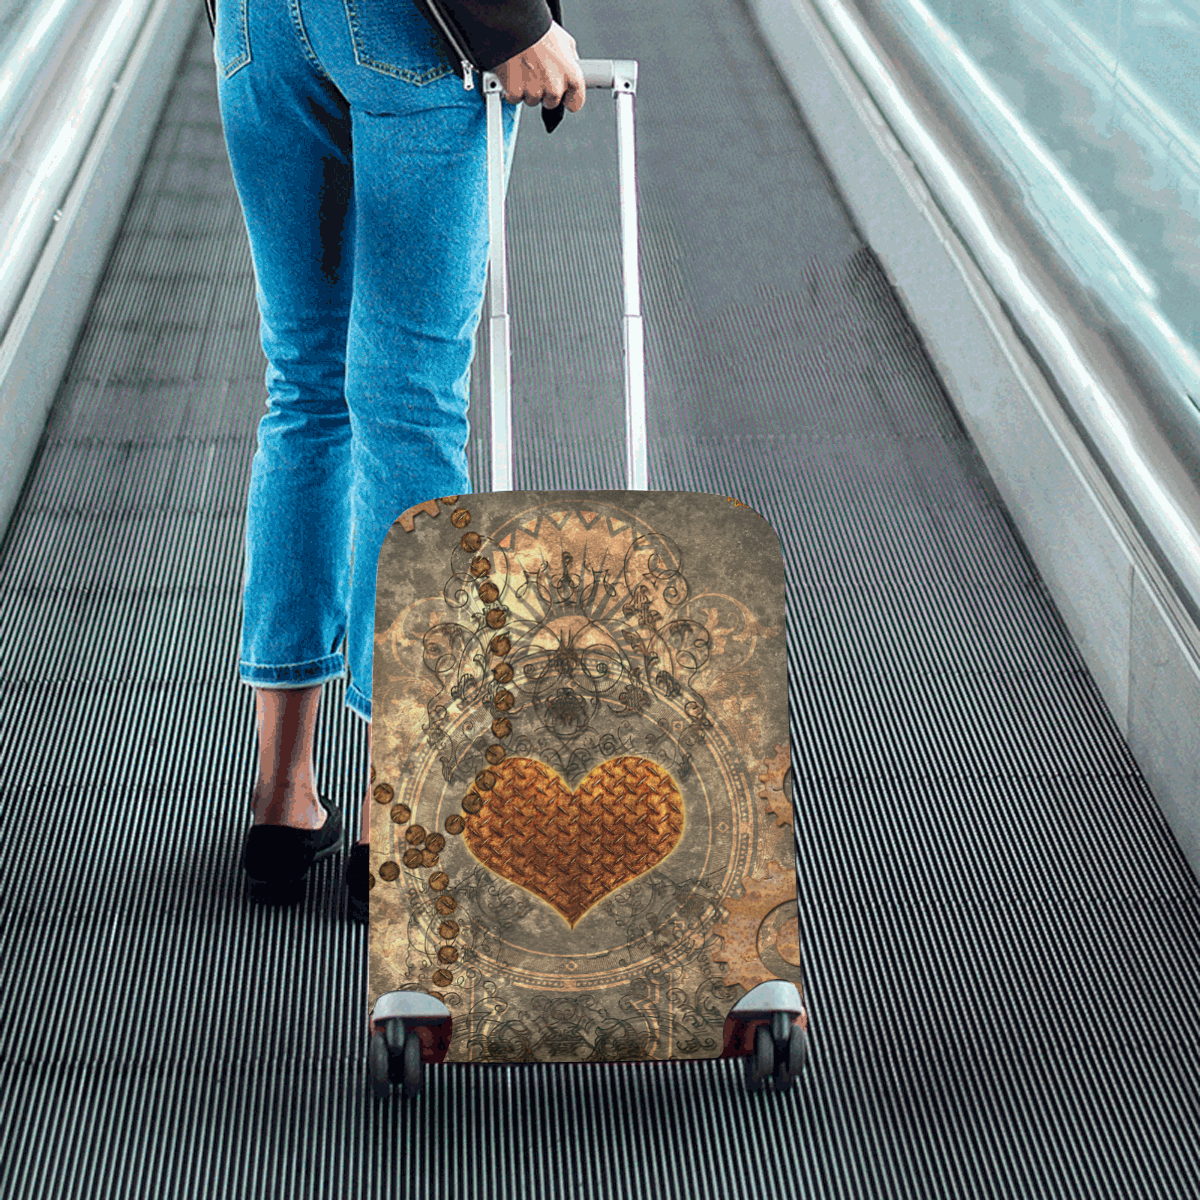 Steampuink, rusty heart with clocks and gears Luggage Cover/Small 18"-21"